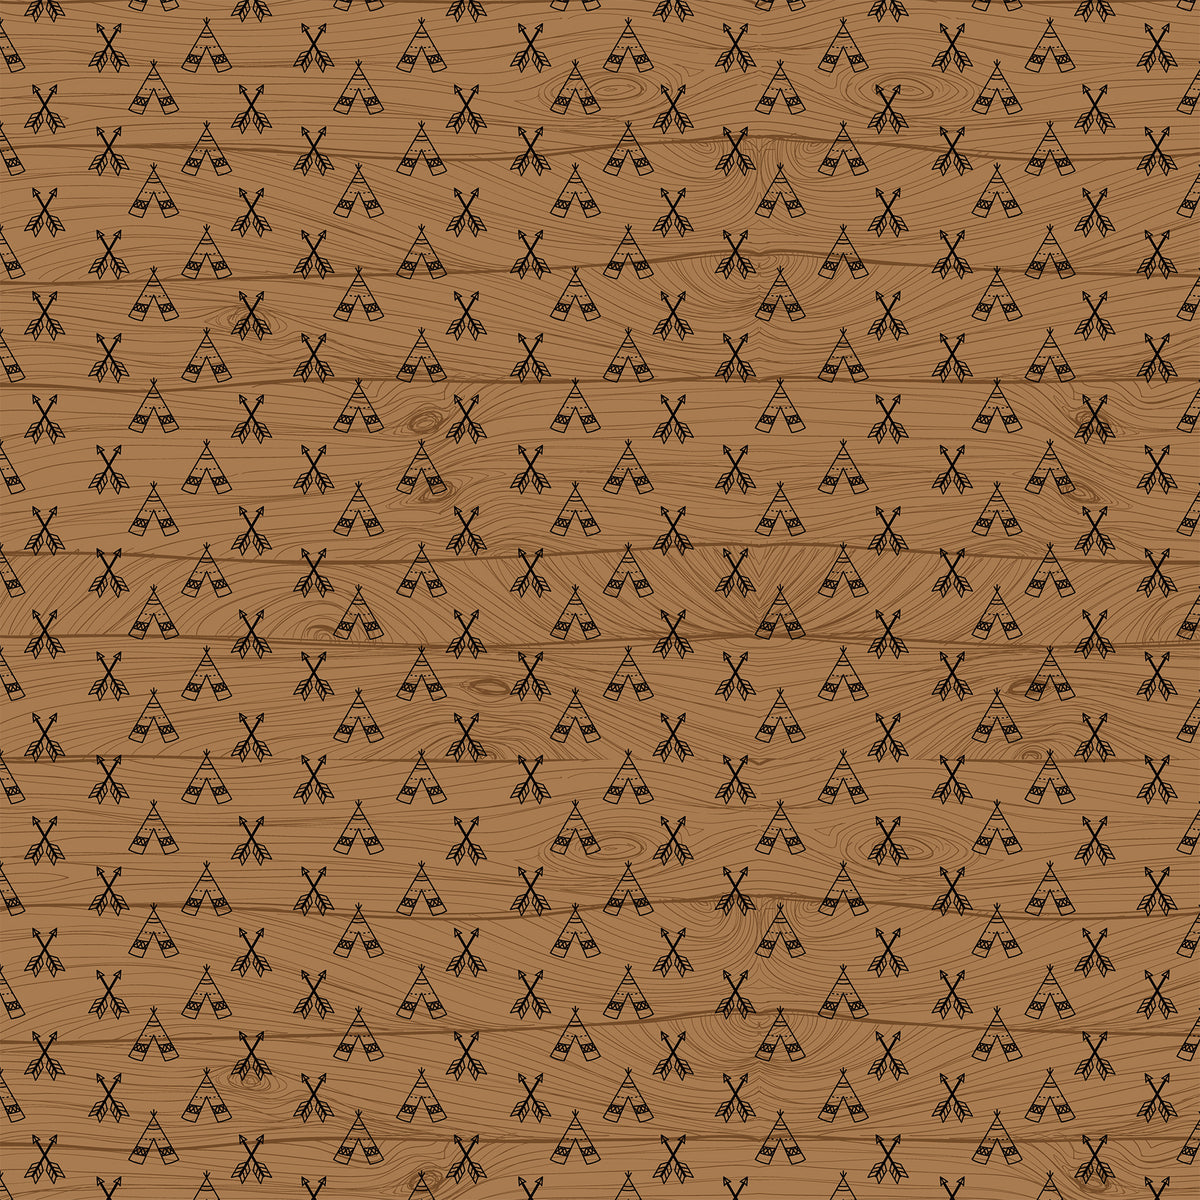 12x12 patterned paper with teepee and arrow graphics on woodgrain background from Echo Park Paper